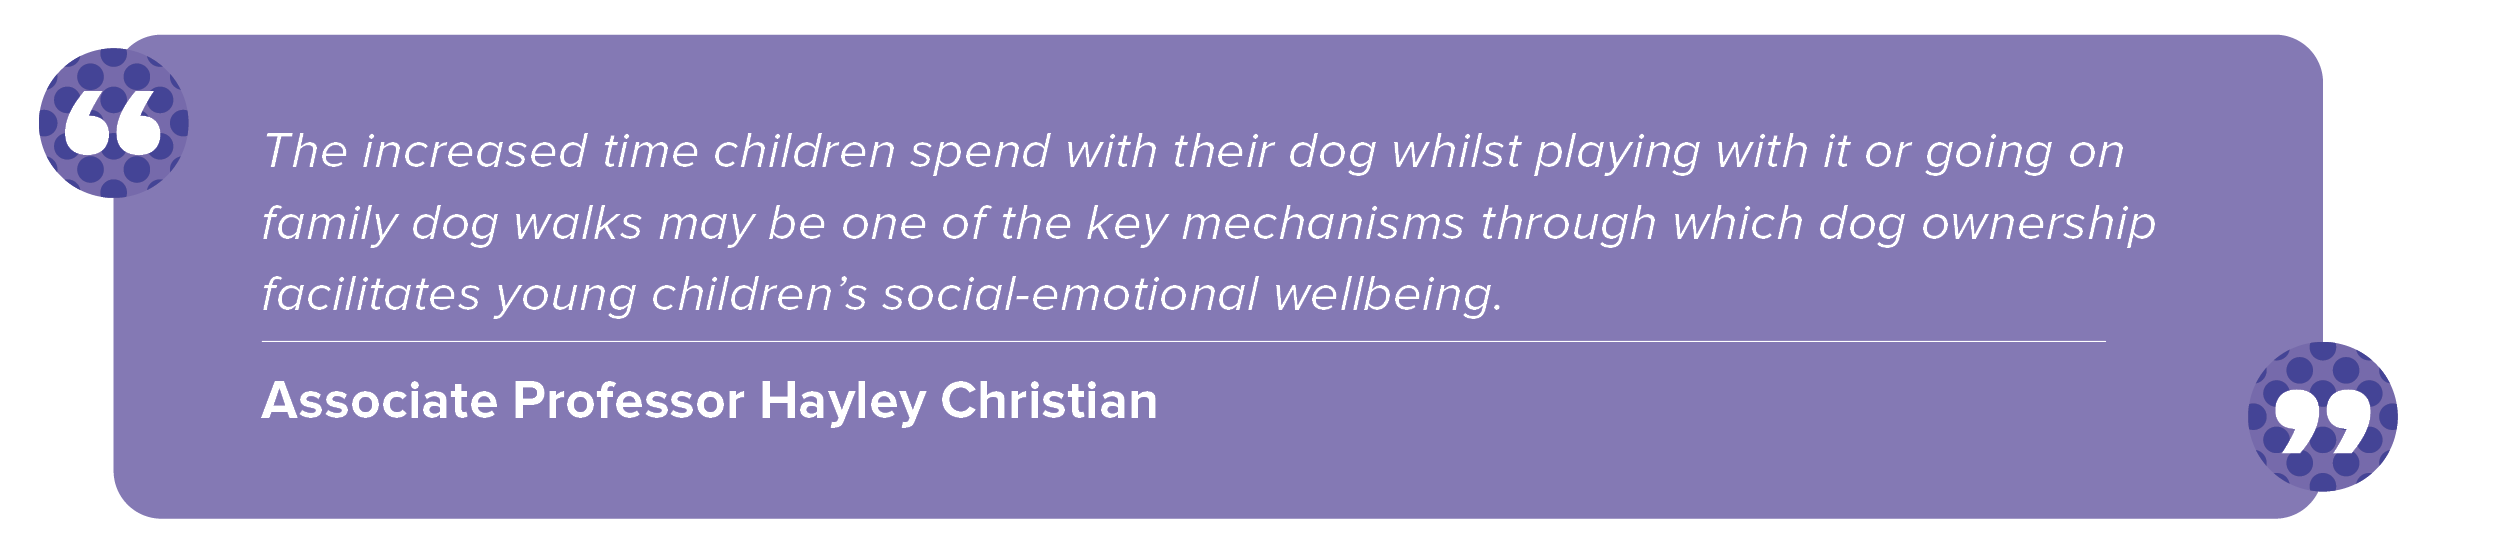 Impact Quote - Associate Professor Hayley Christian.png